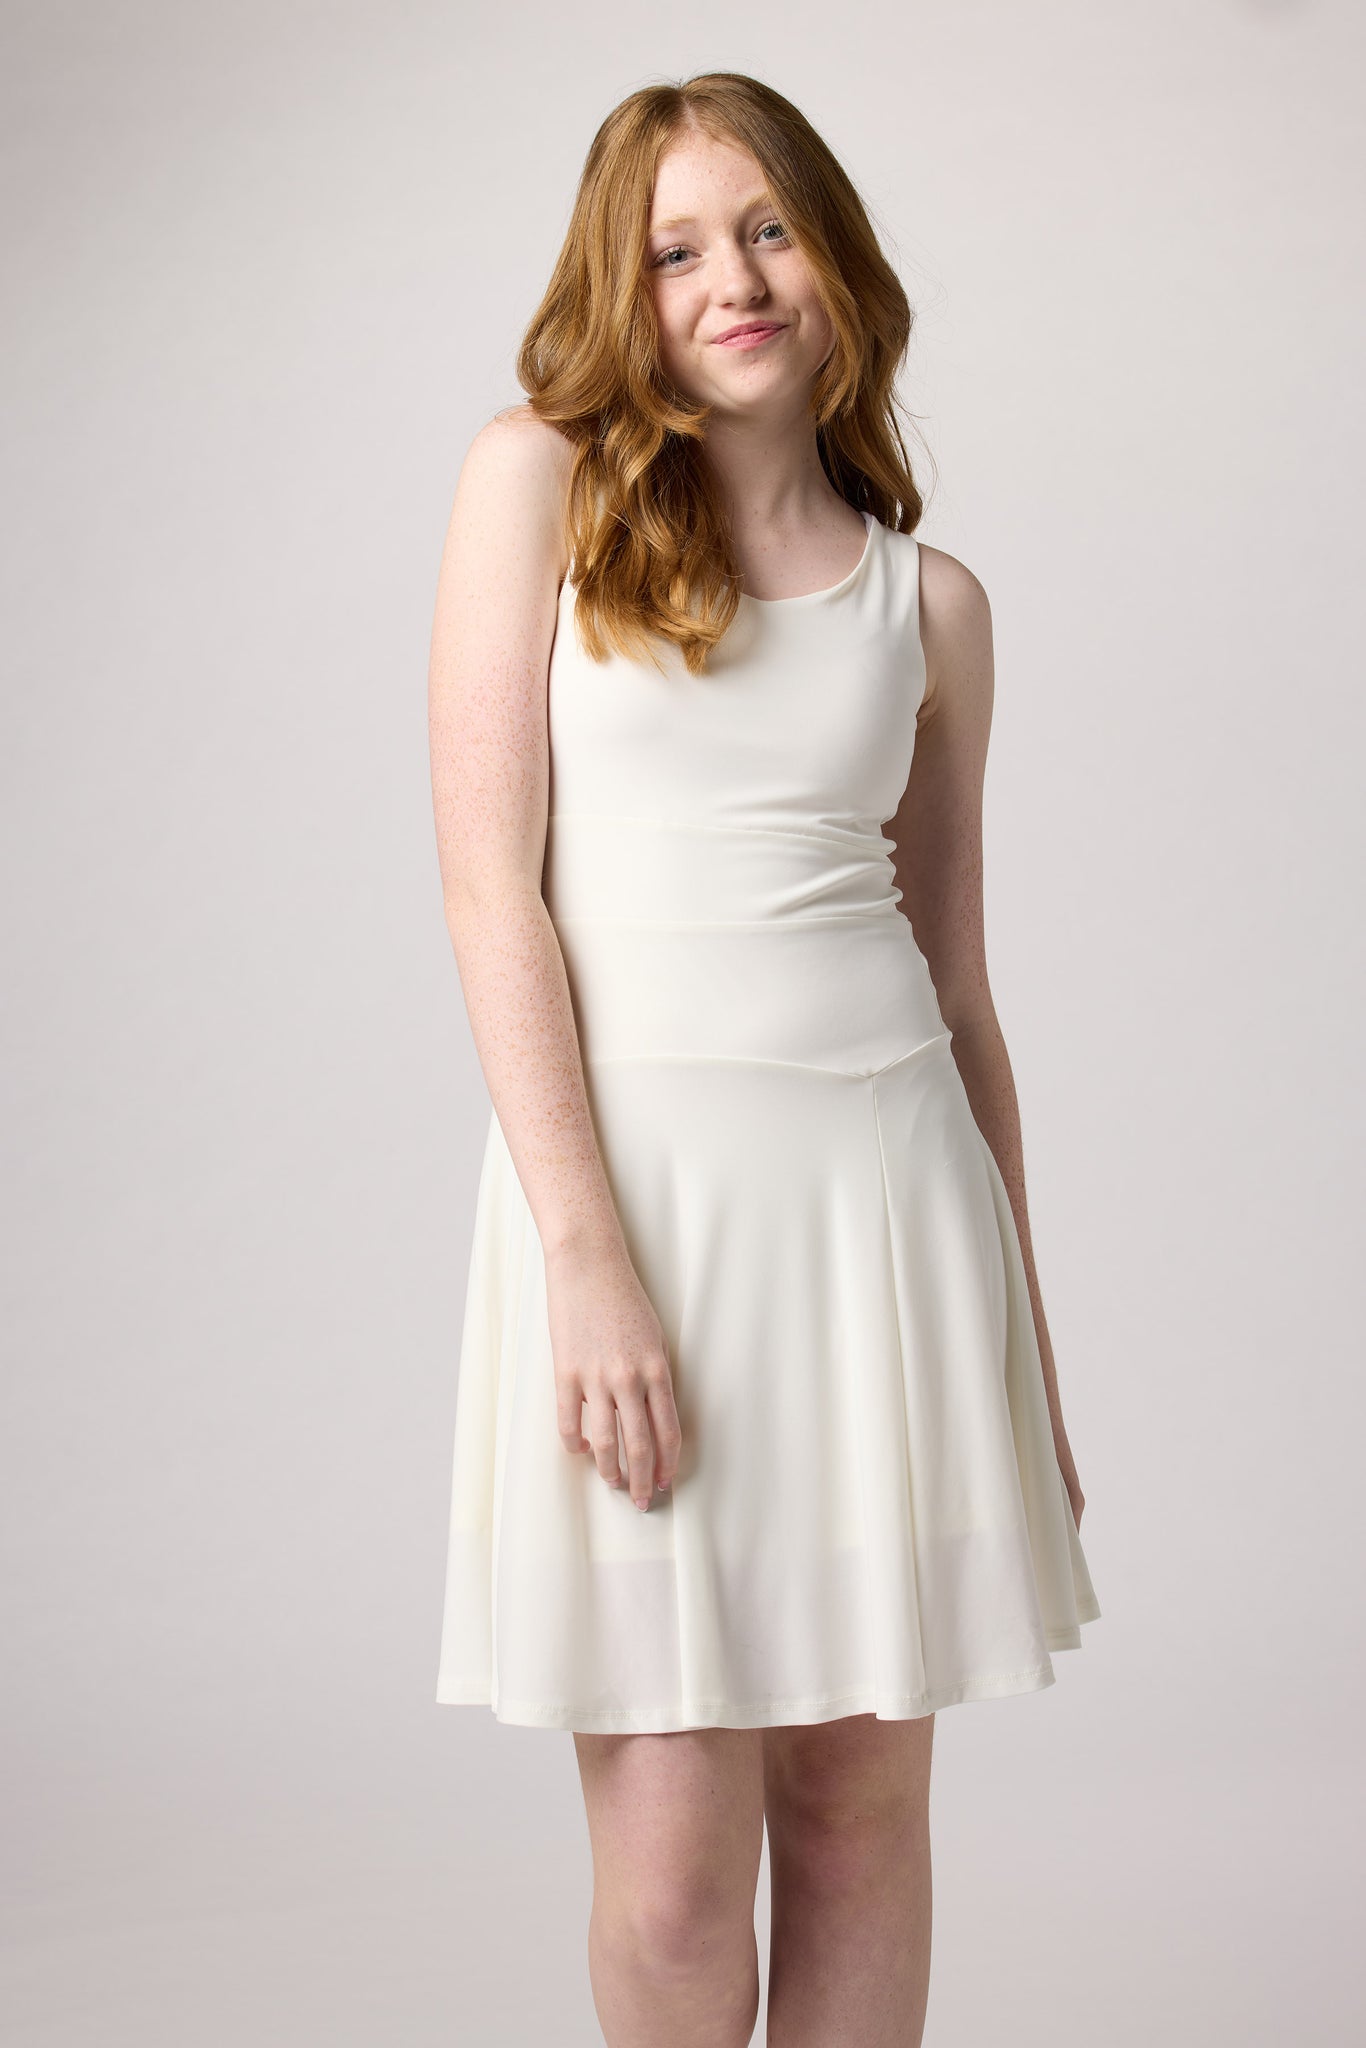 Red head girl in an Un Deux Trois skater dress in ivory with nude heel.